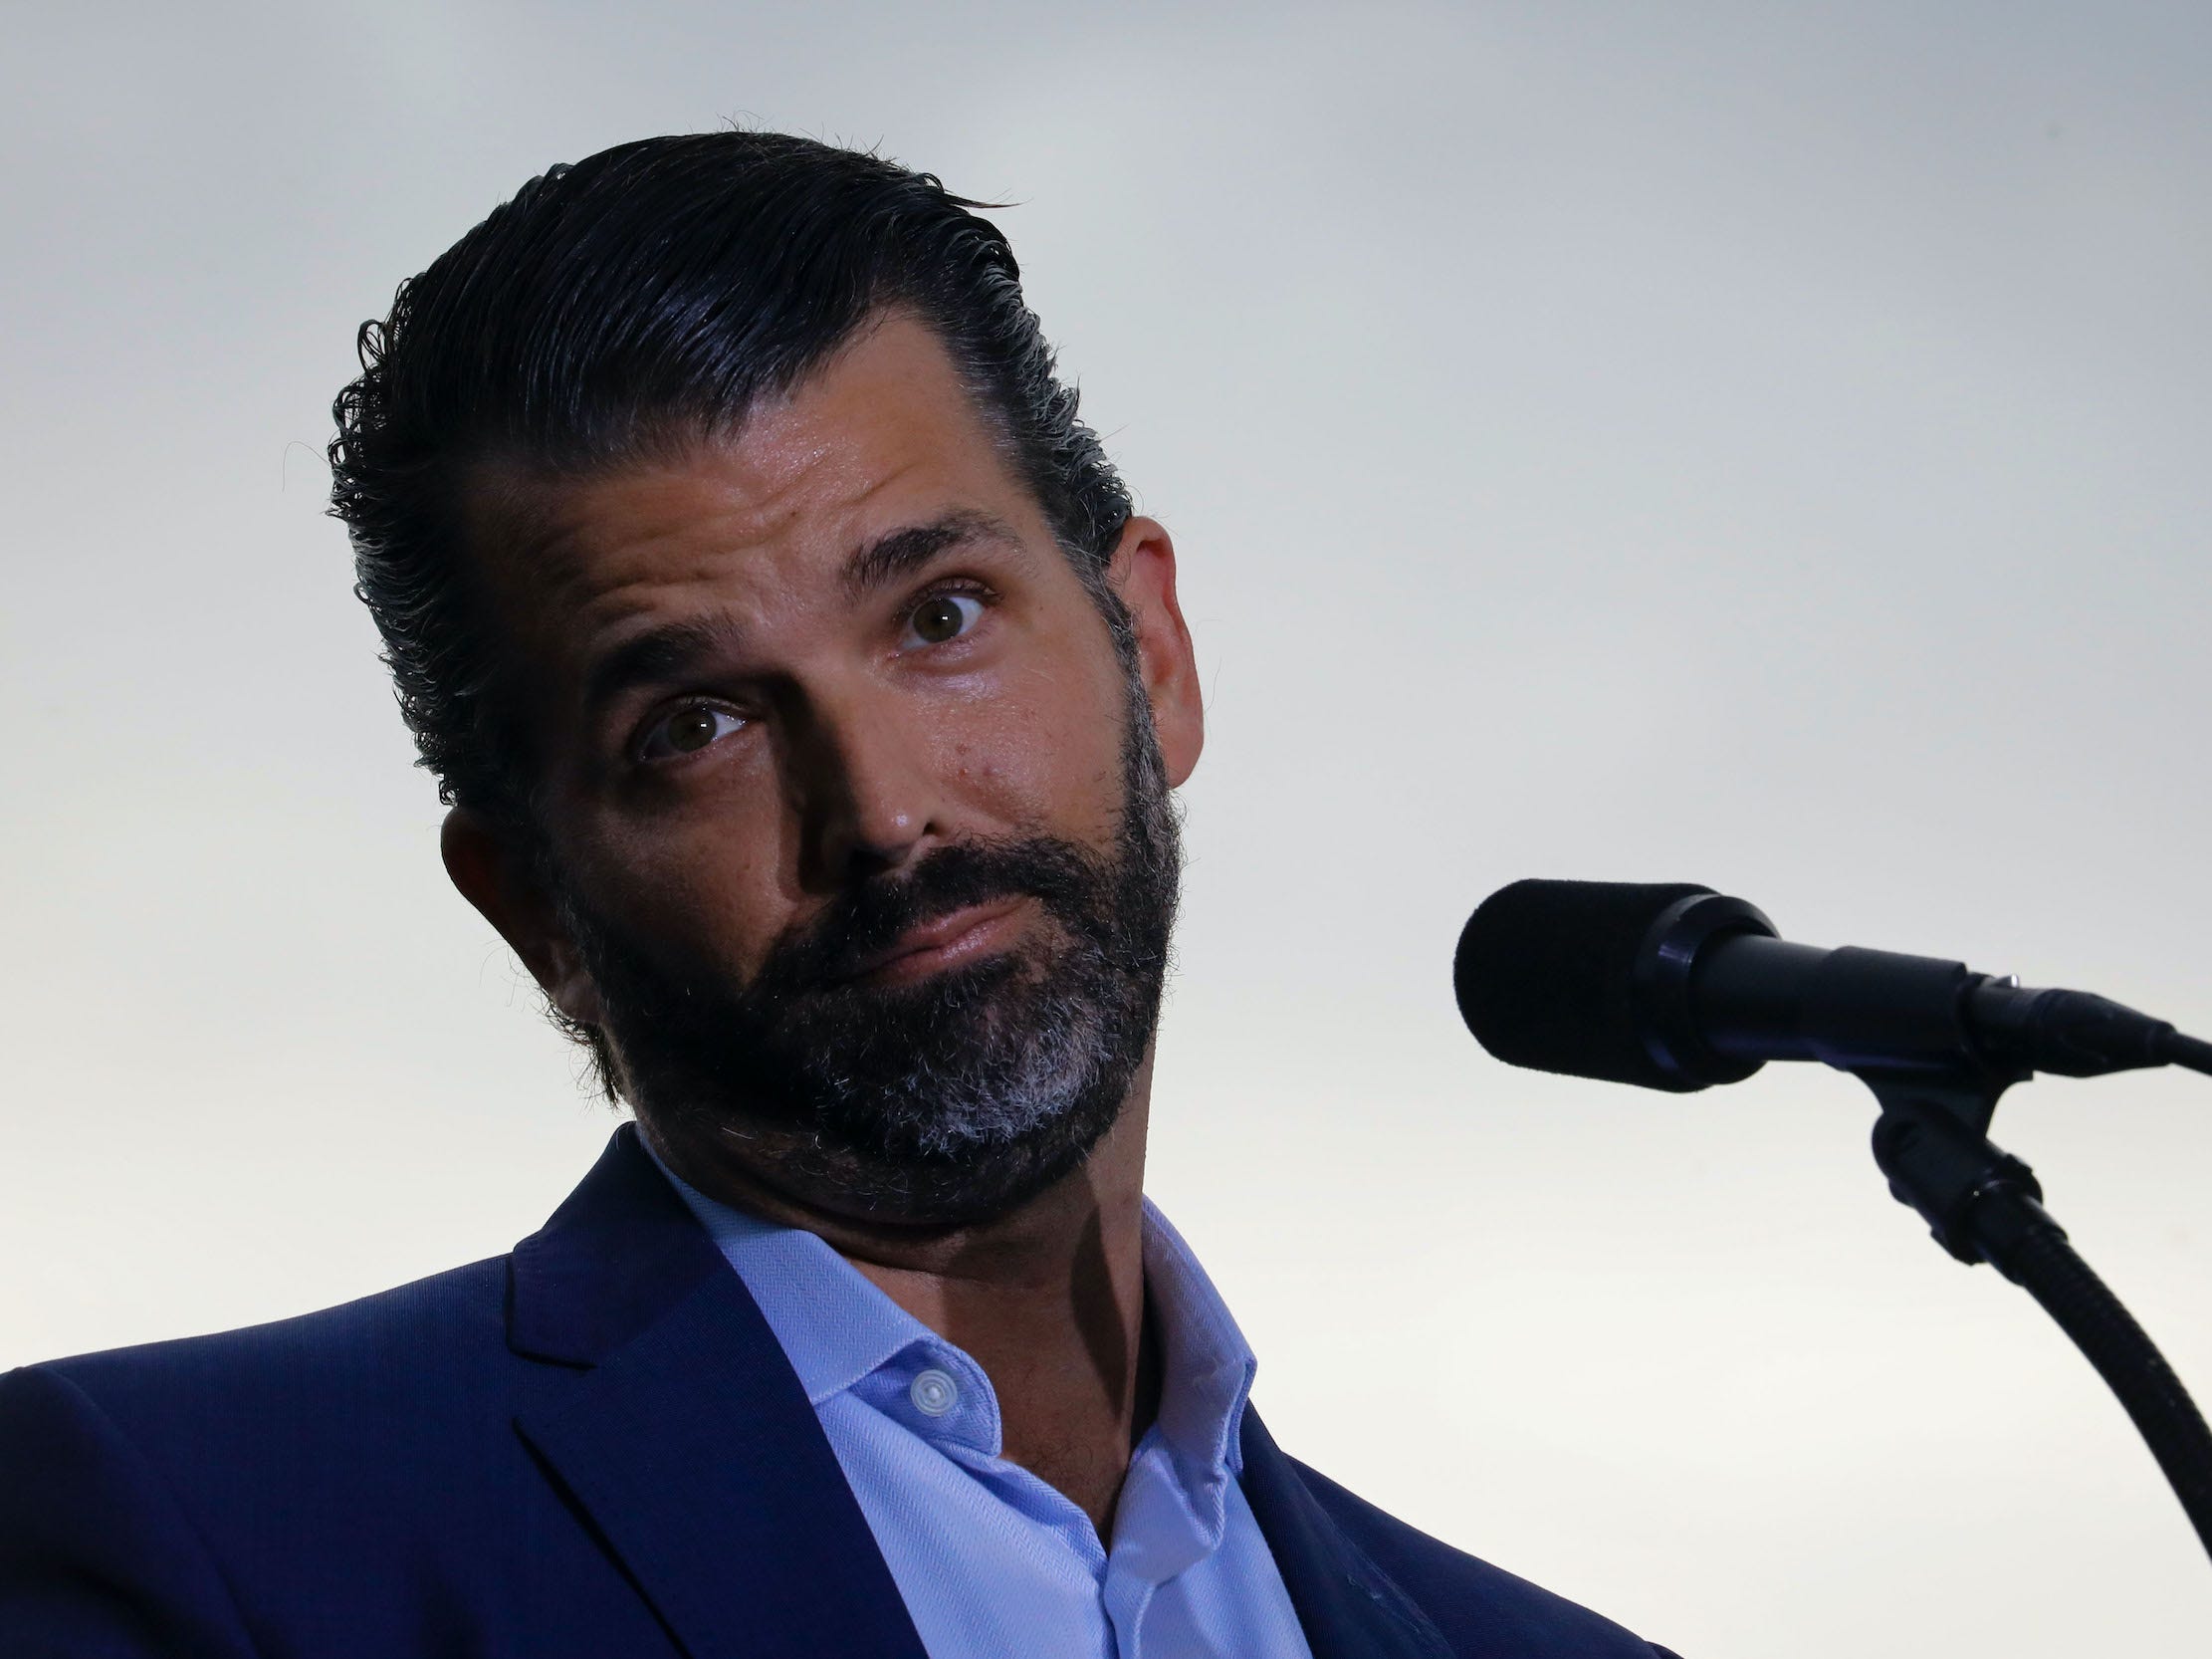 Donald Trump Jr. tilts his head and raises his eyebrows with his lips pursed behind the mic at a Trump rally.